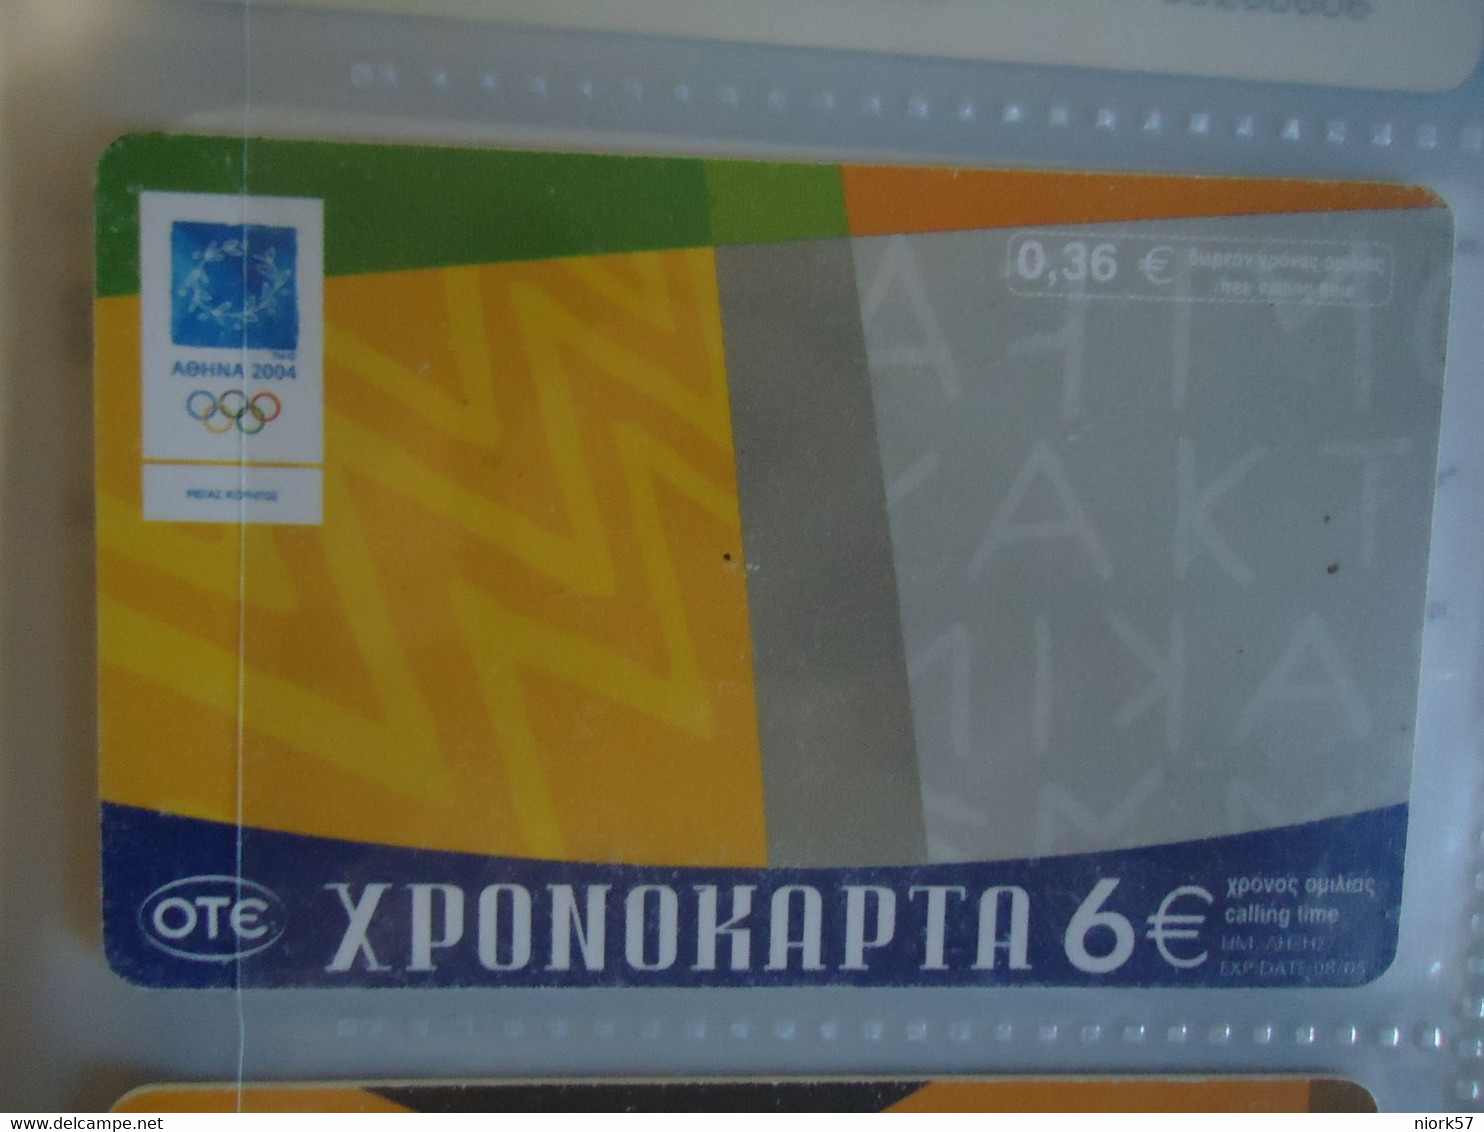 GREECE USED PREPAID CARDS SPORT OLYMPIC GAMES - Olympische Spiele